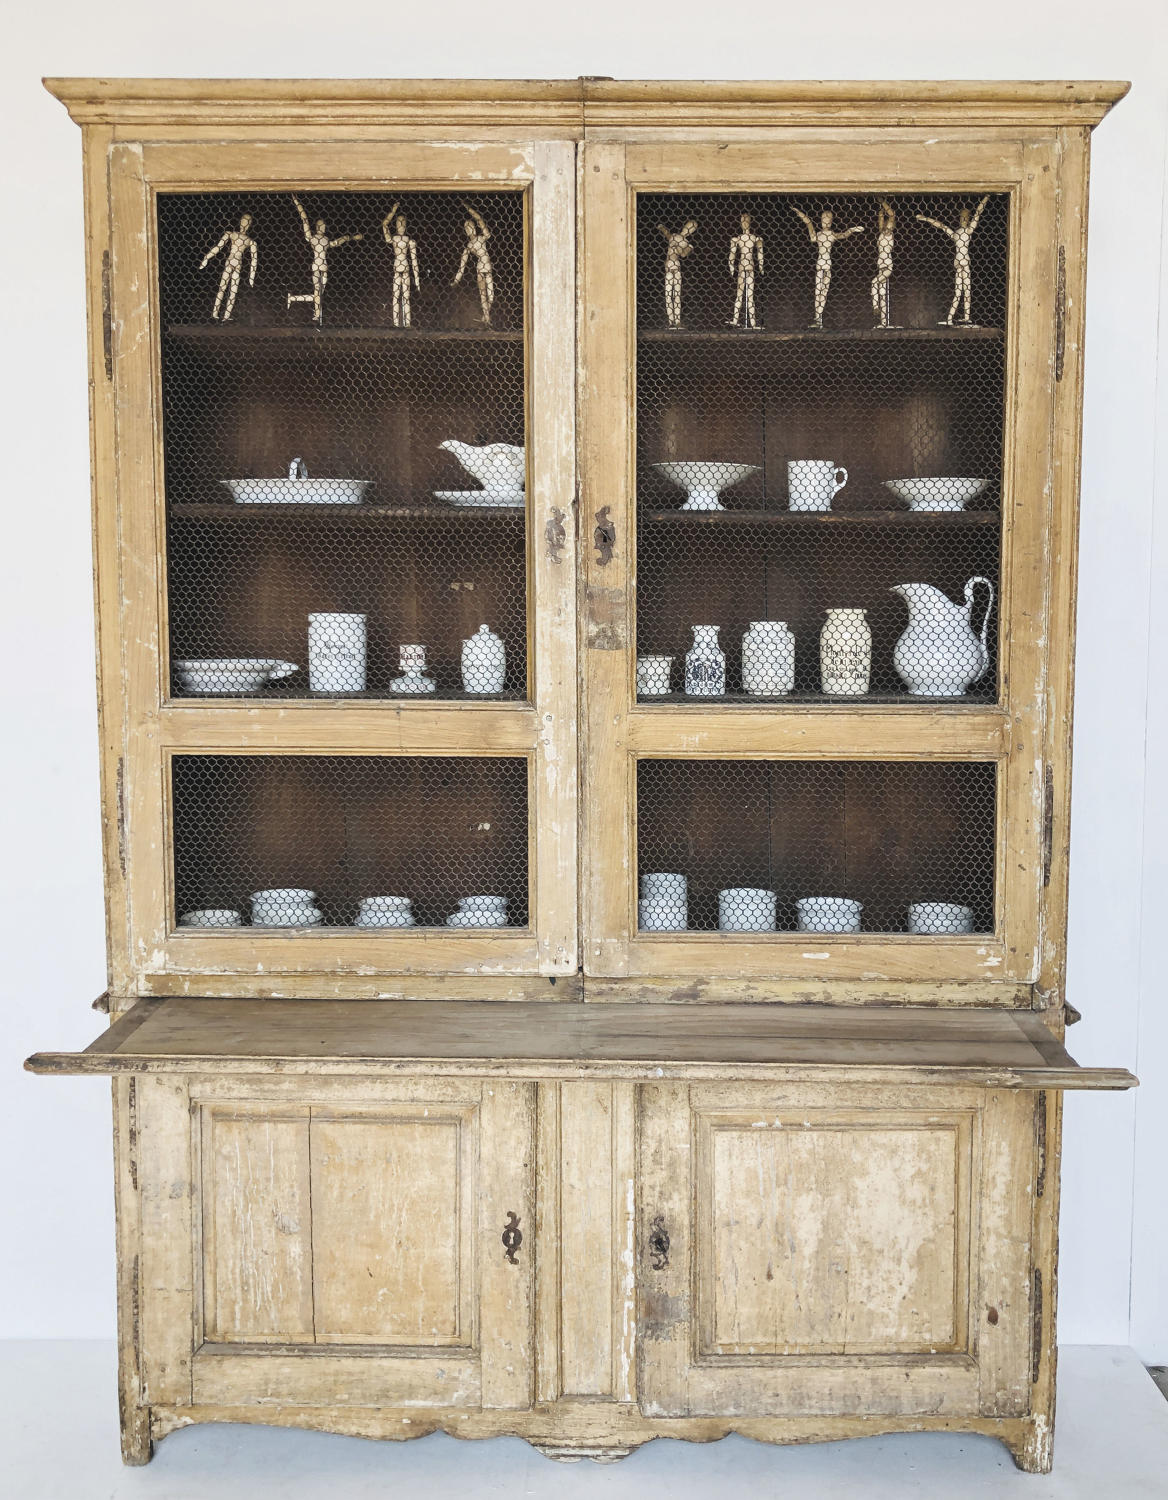 French 18th c Cupboard with original Mesh & Paint - circa 1770